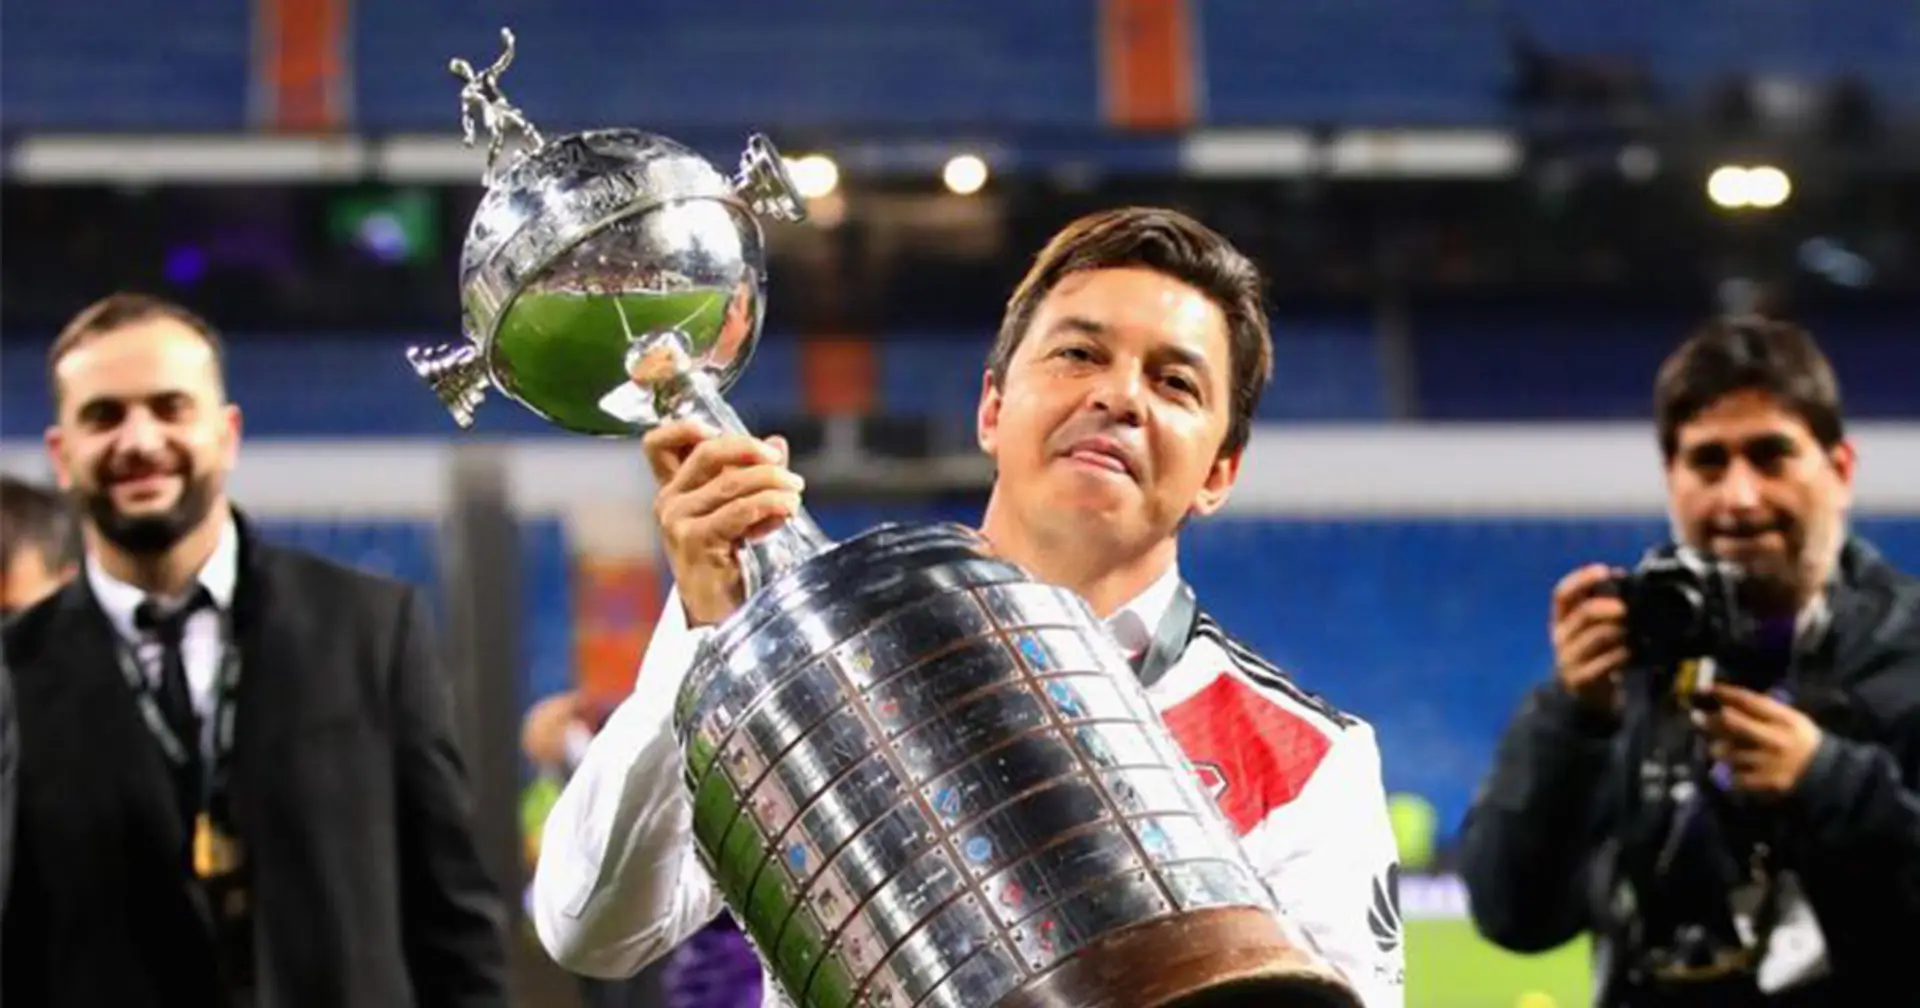 Barcelona-linked Marcelo Gallardo 'current favourite' to replace Zidane as Real Madrid boss